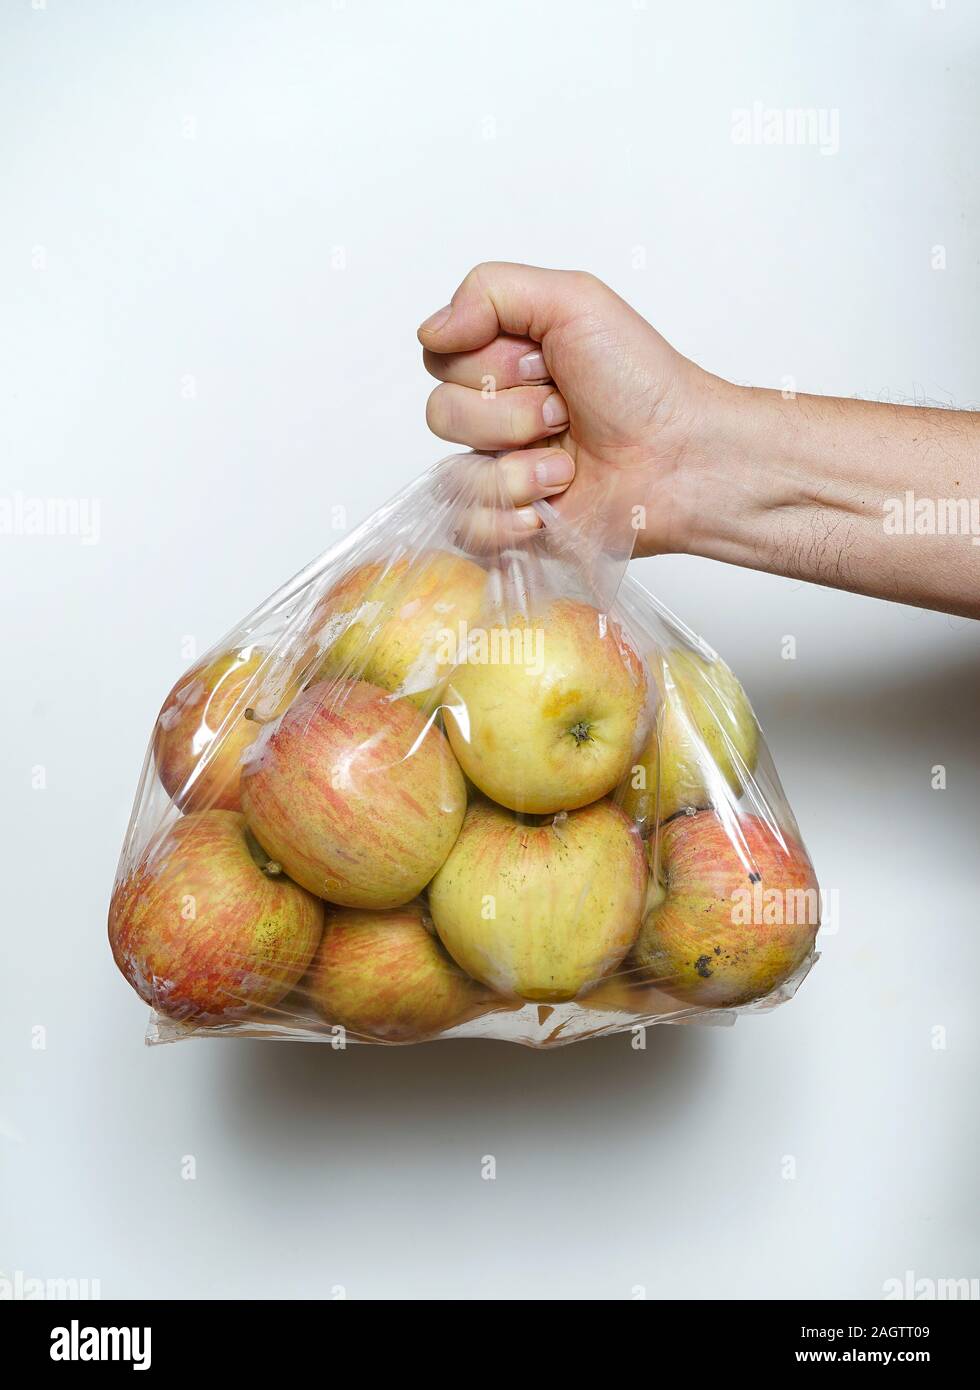 Download Some Apples In A Plastic Bag Stock Photo Alamy PSD Mockup Templates